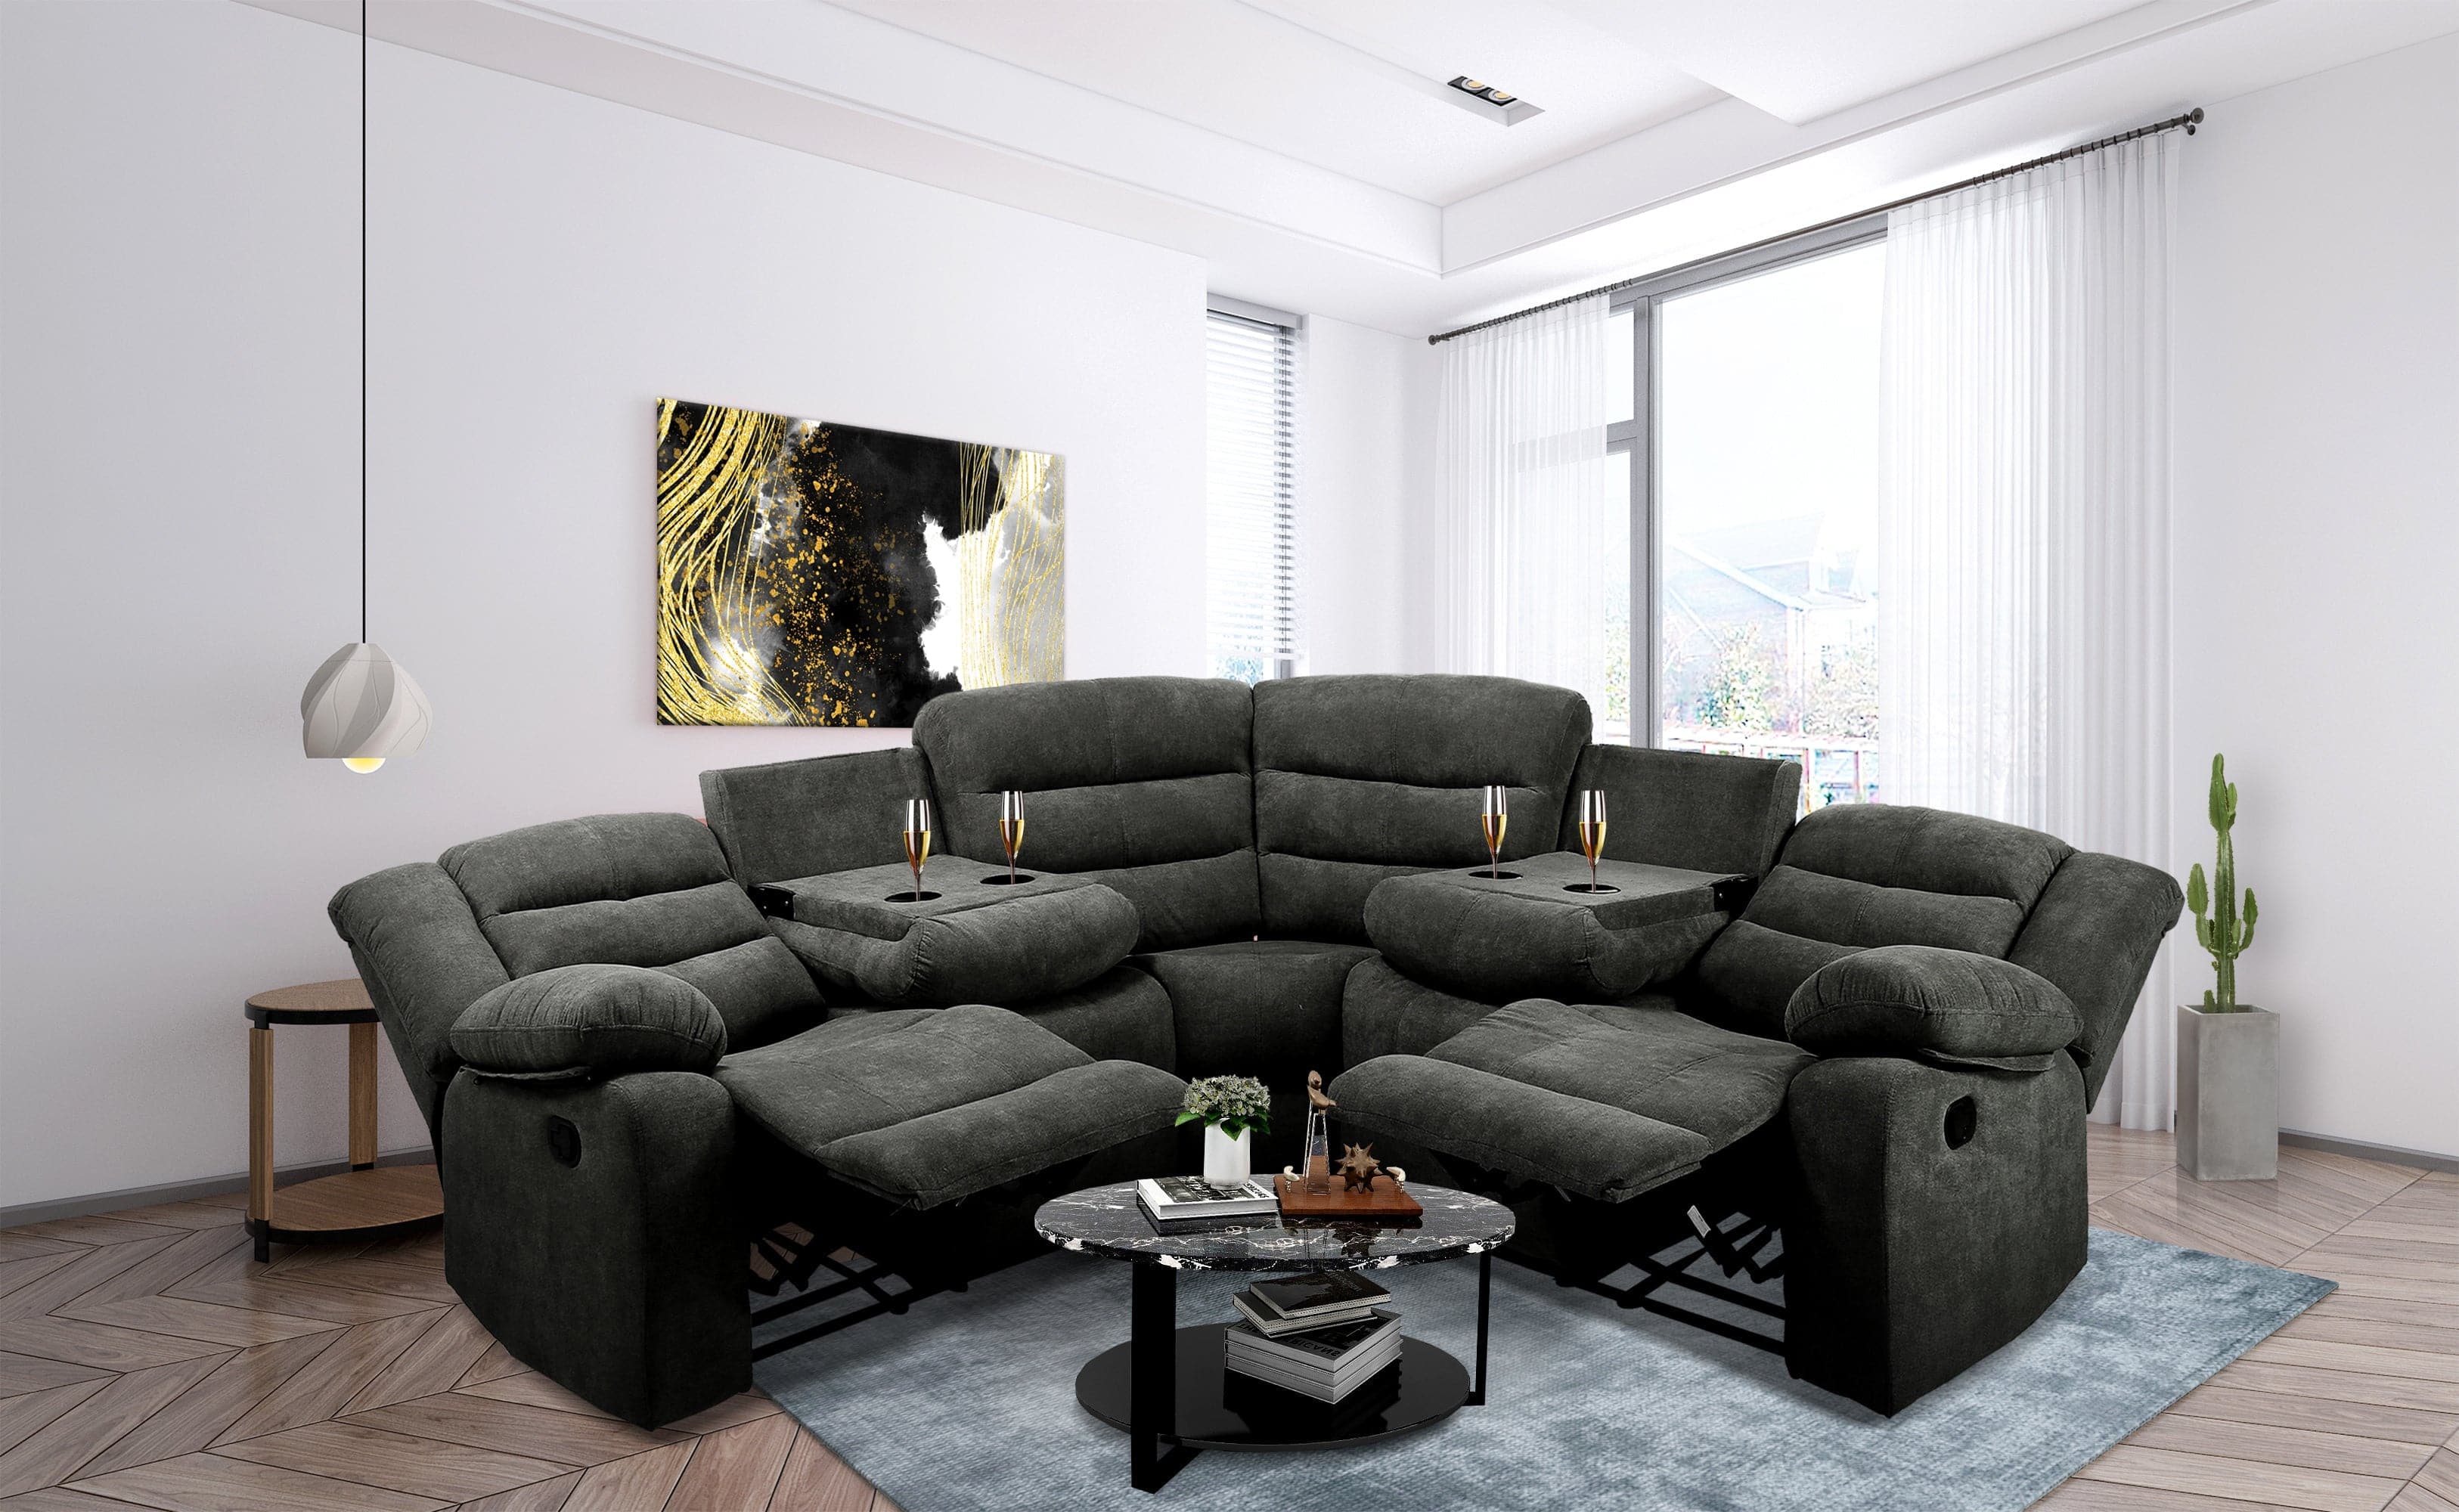 - TFC&H Co. Sectional Manual Recliner Living Room Set - Dark Grey- Ships from The US - sectional at TFC&H Co.